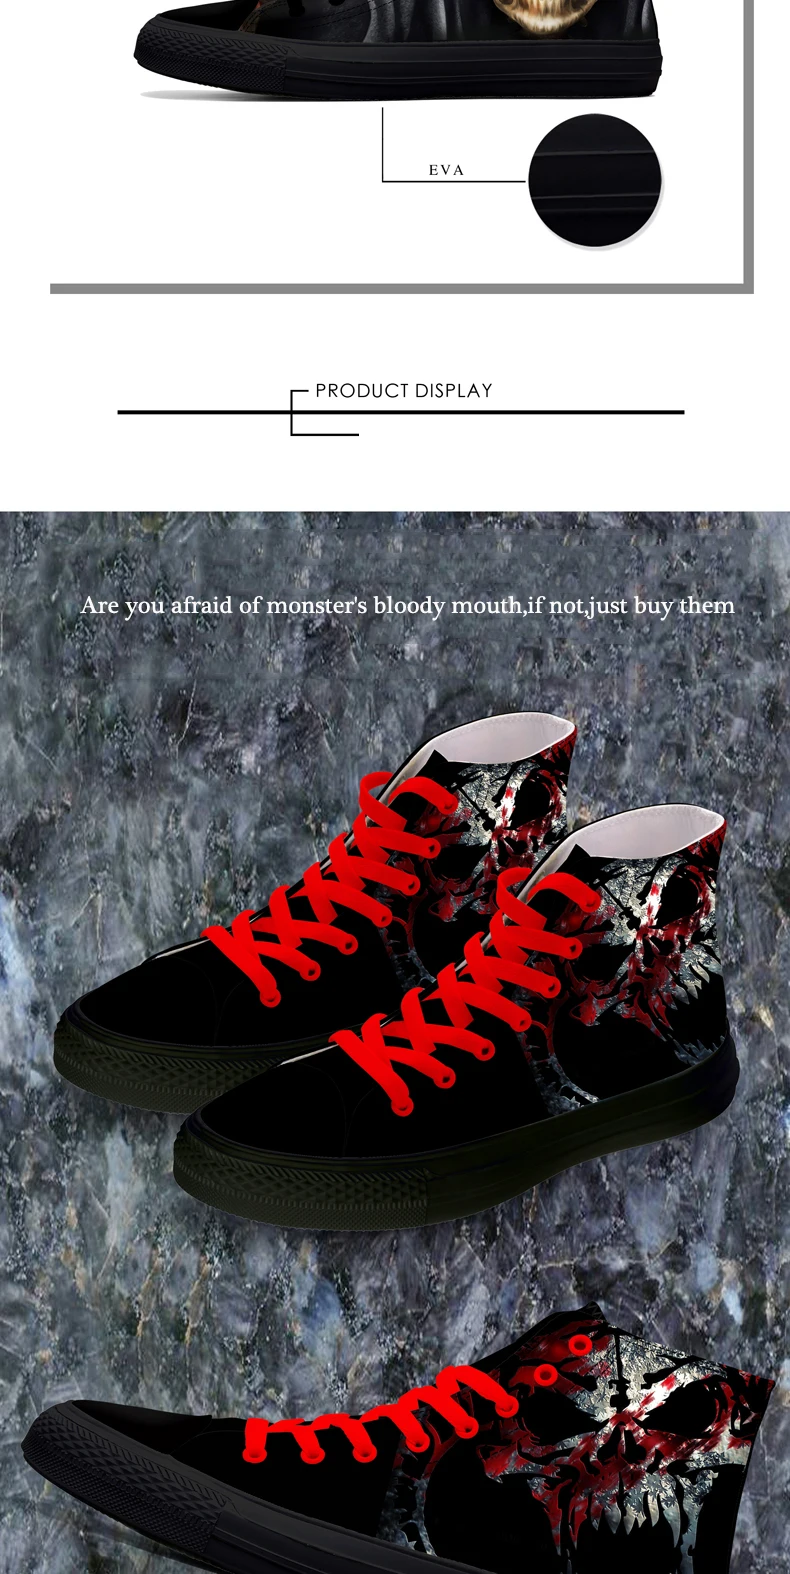 FIRST DANCE Casual Black Punk Skull High Top Shoes Men Classic High Canvas Shoes Fashion 3D Street Nice Printed Casual Shoes Men 7